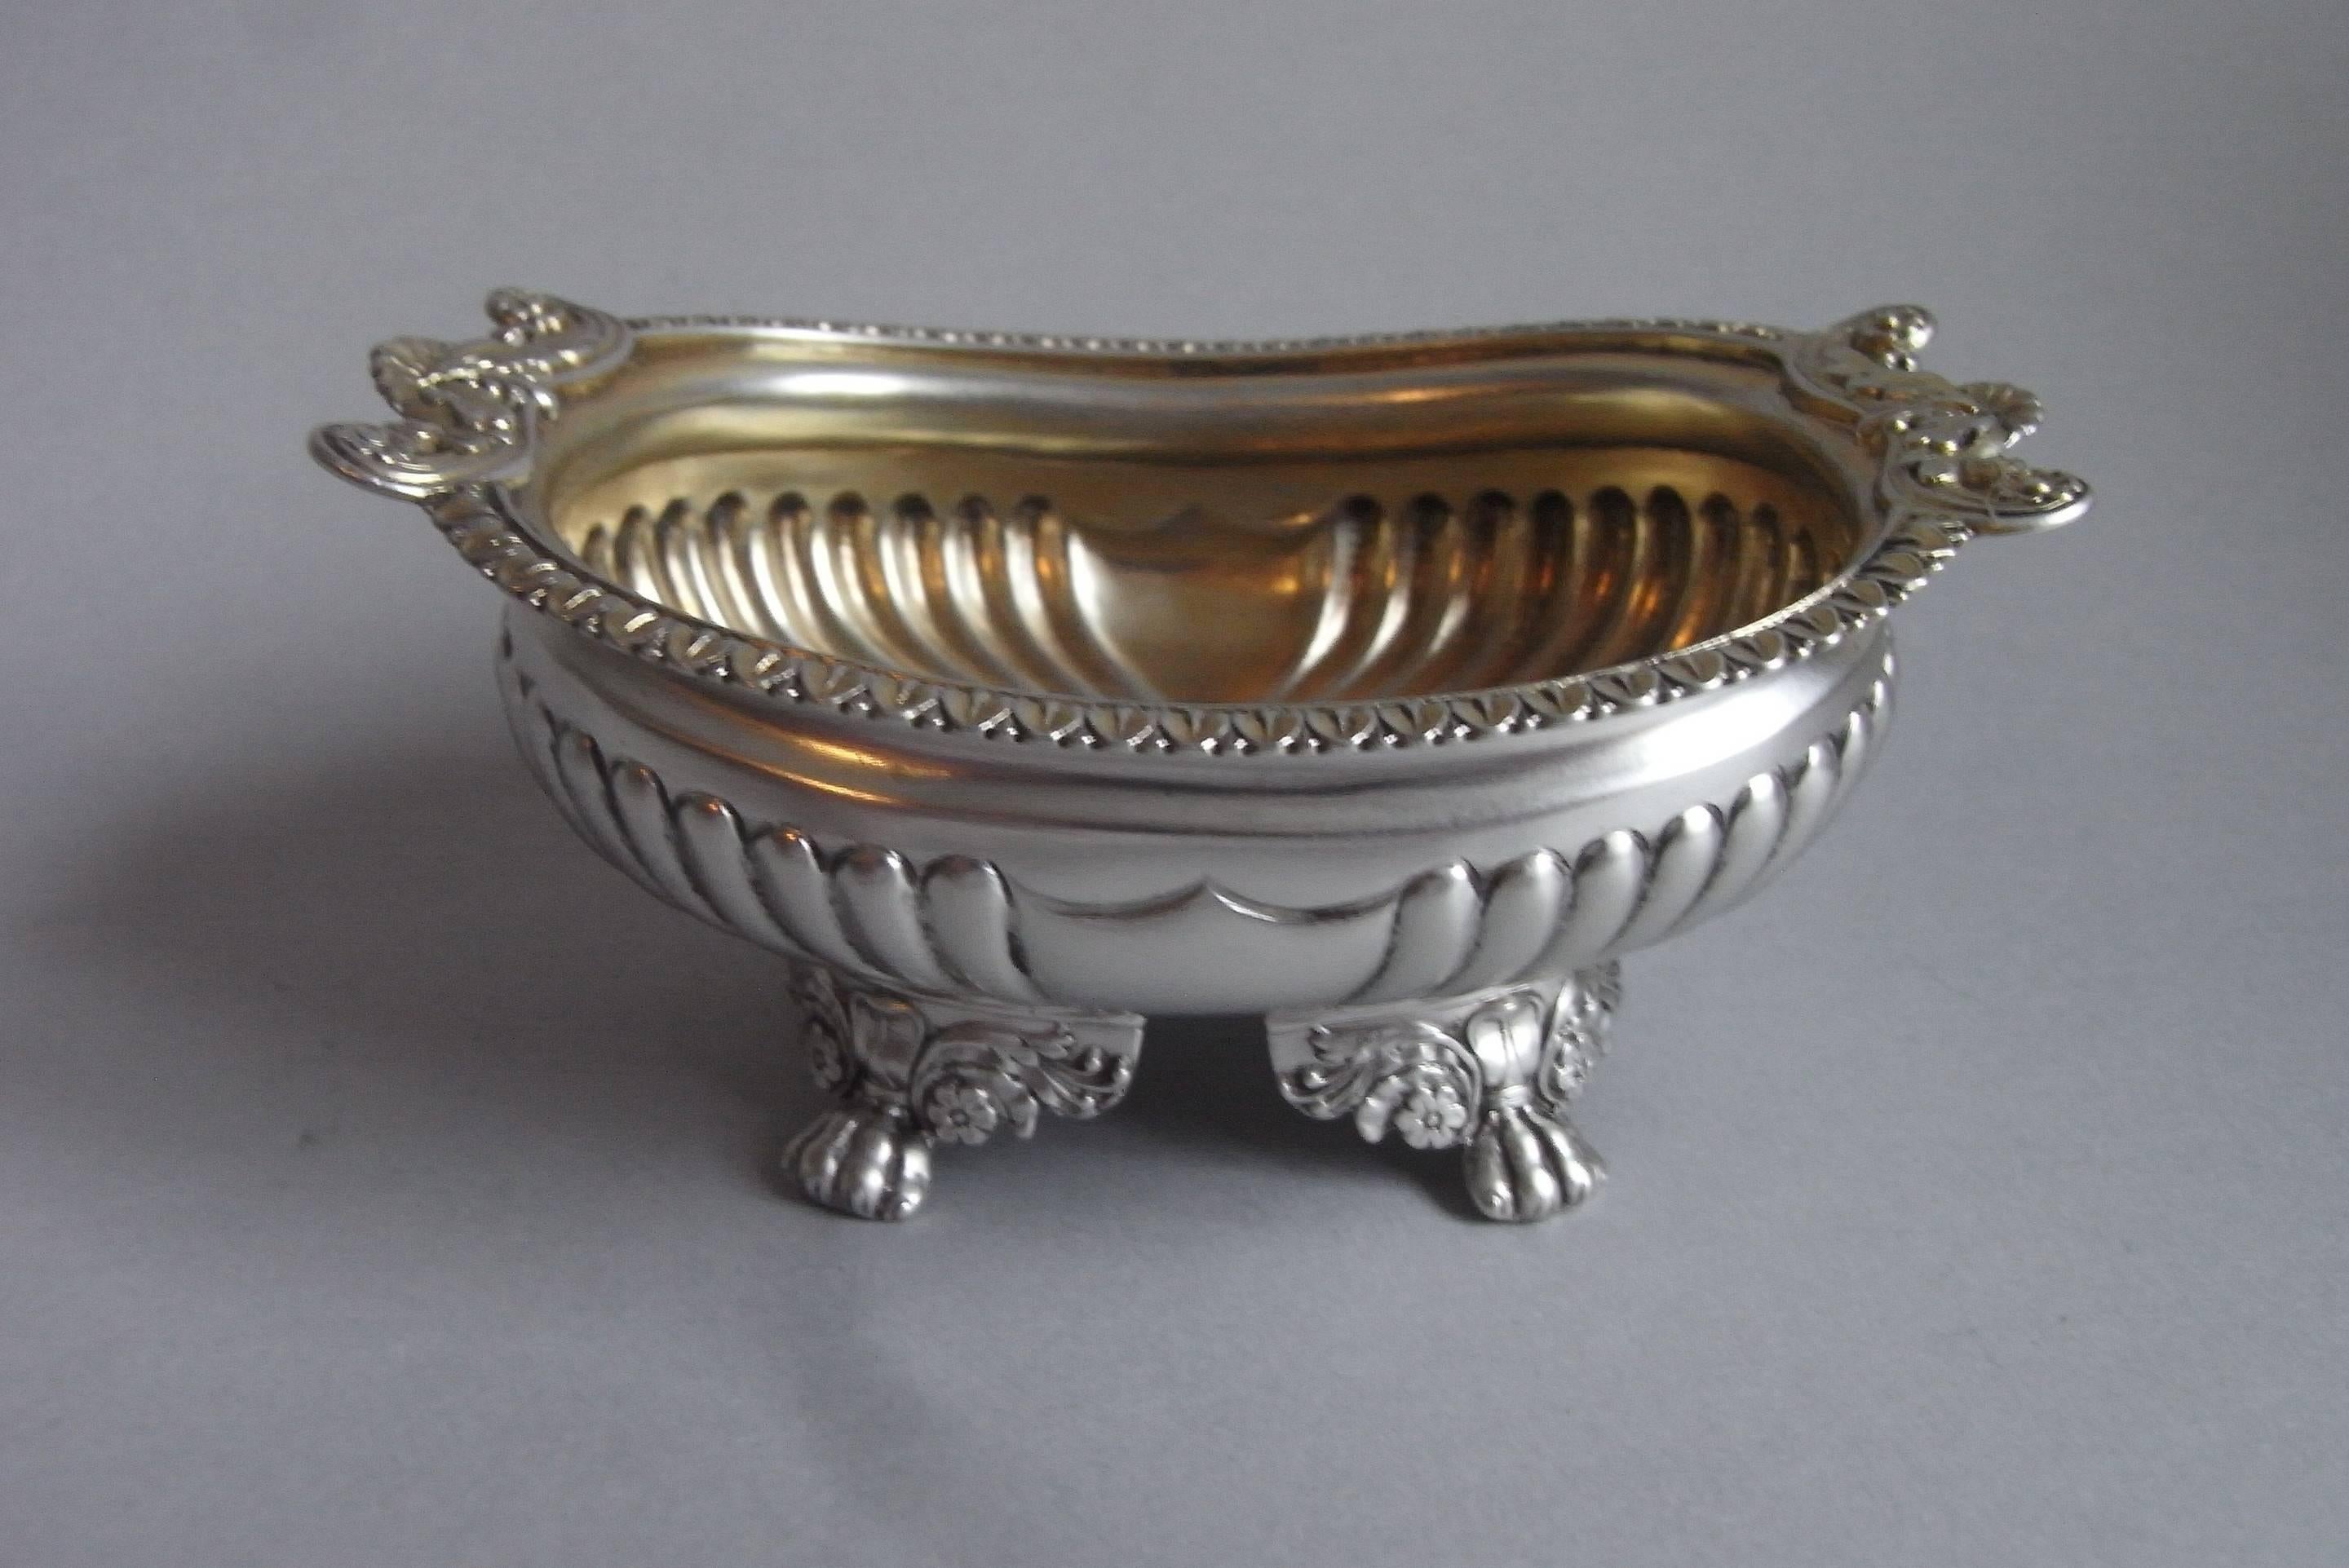 The salt cellars are rectangular in form and Stand on four floral and foliate winged paw feet. The baluster main bodies are decorated with lobing and display a vacant shield shaped cartouche on each side. The everted rim is decorated with foliate